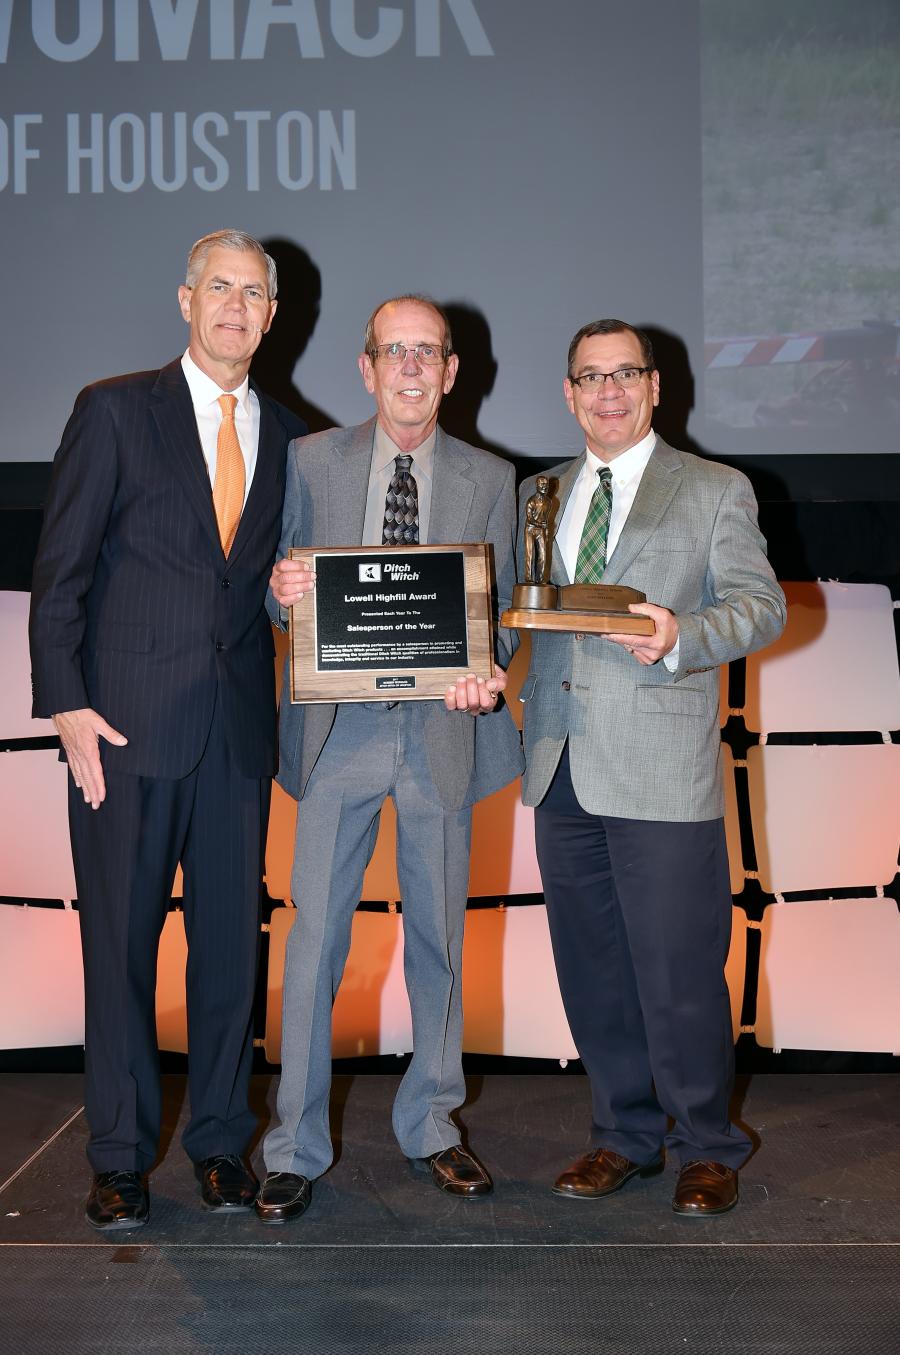 Ditch Witch recognized Robbin Womack of Ditch Witch of Houston with the 2017 Lowell Highfill Award – the organization’s most prestigious award for salespeople worldwide.